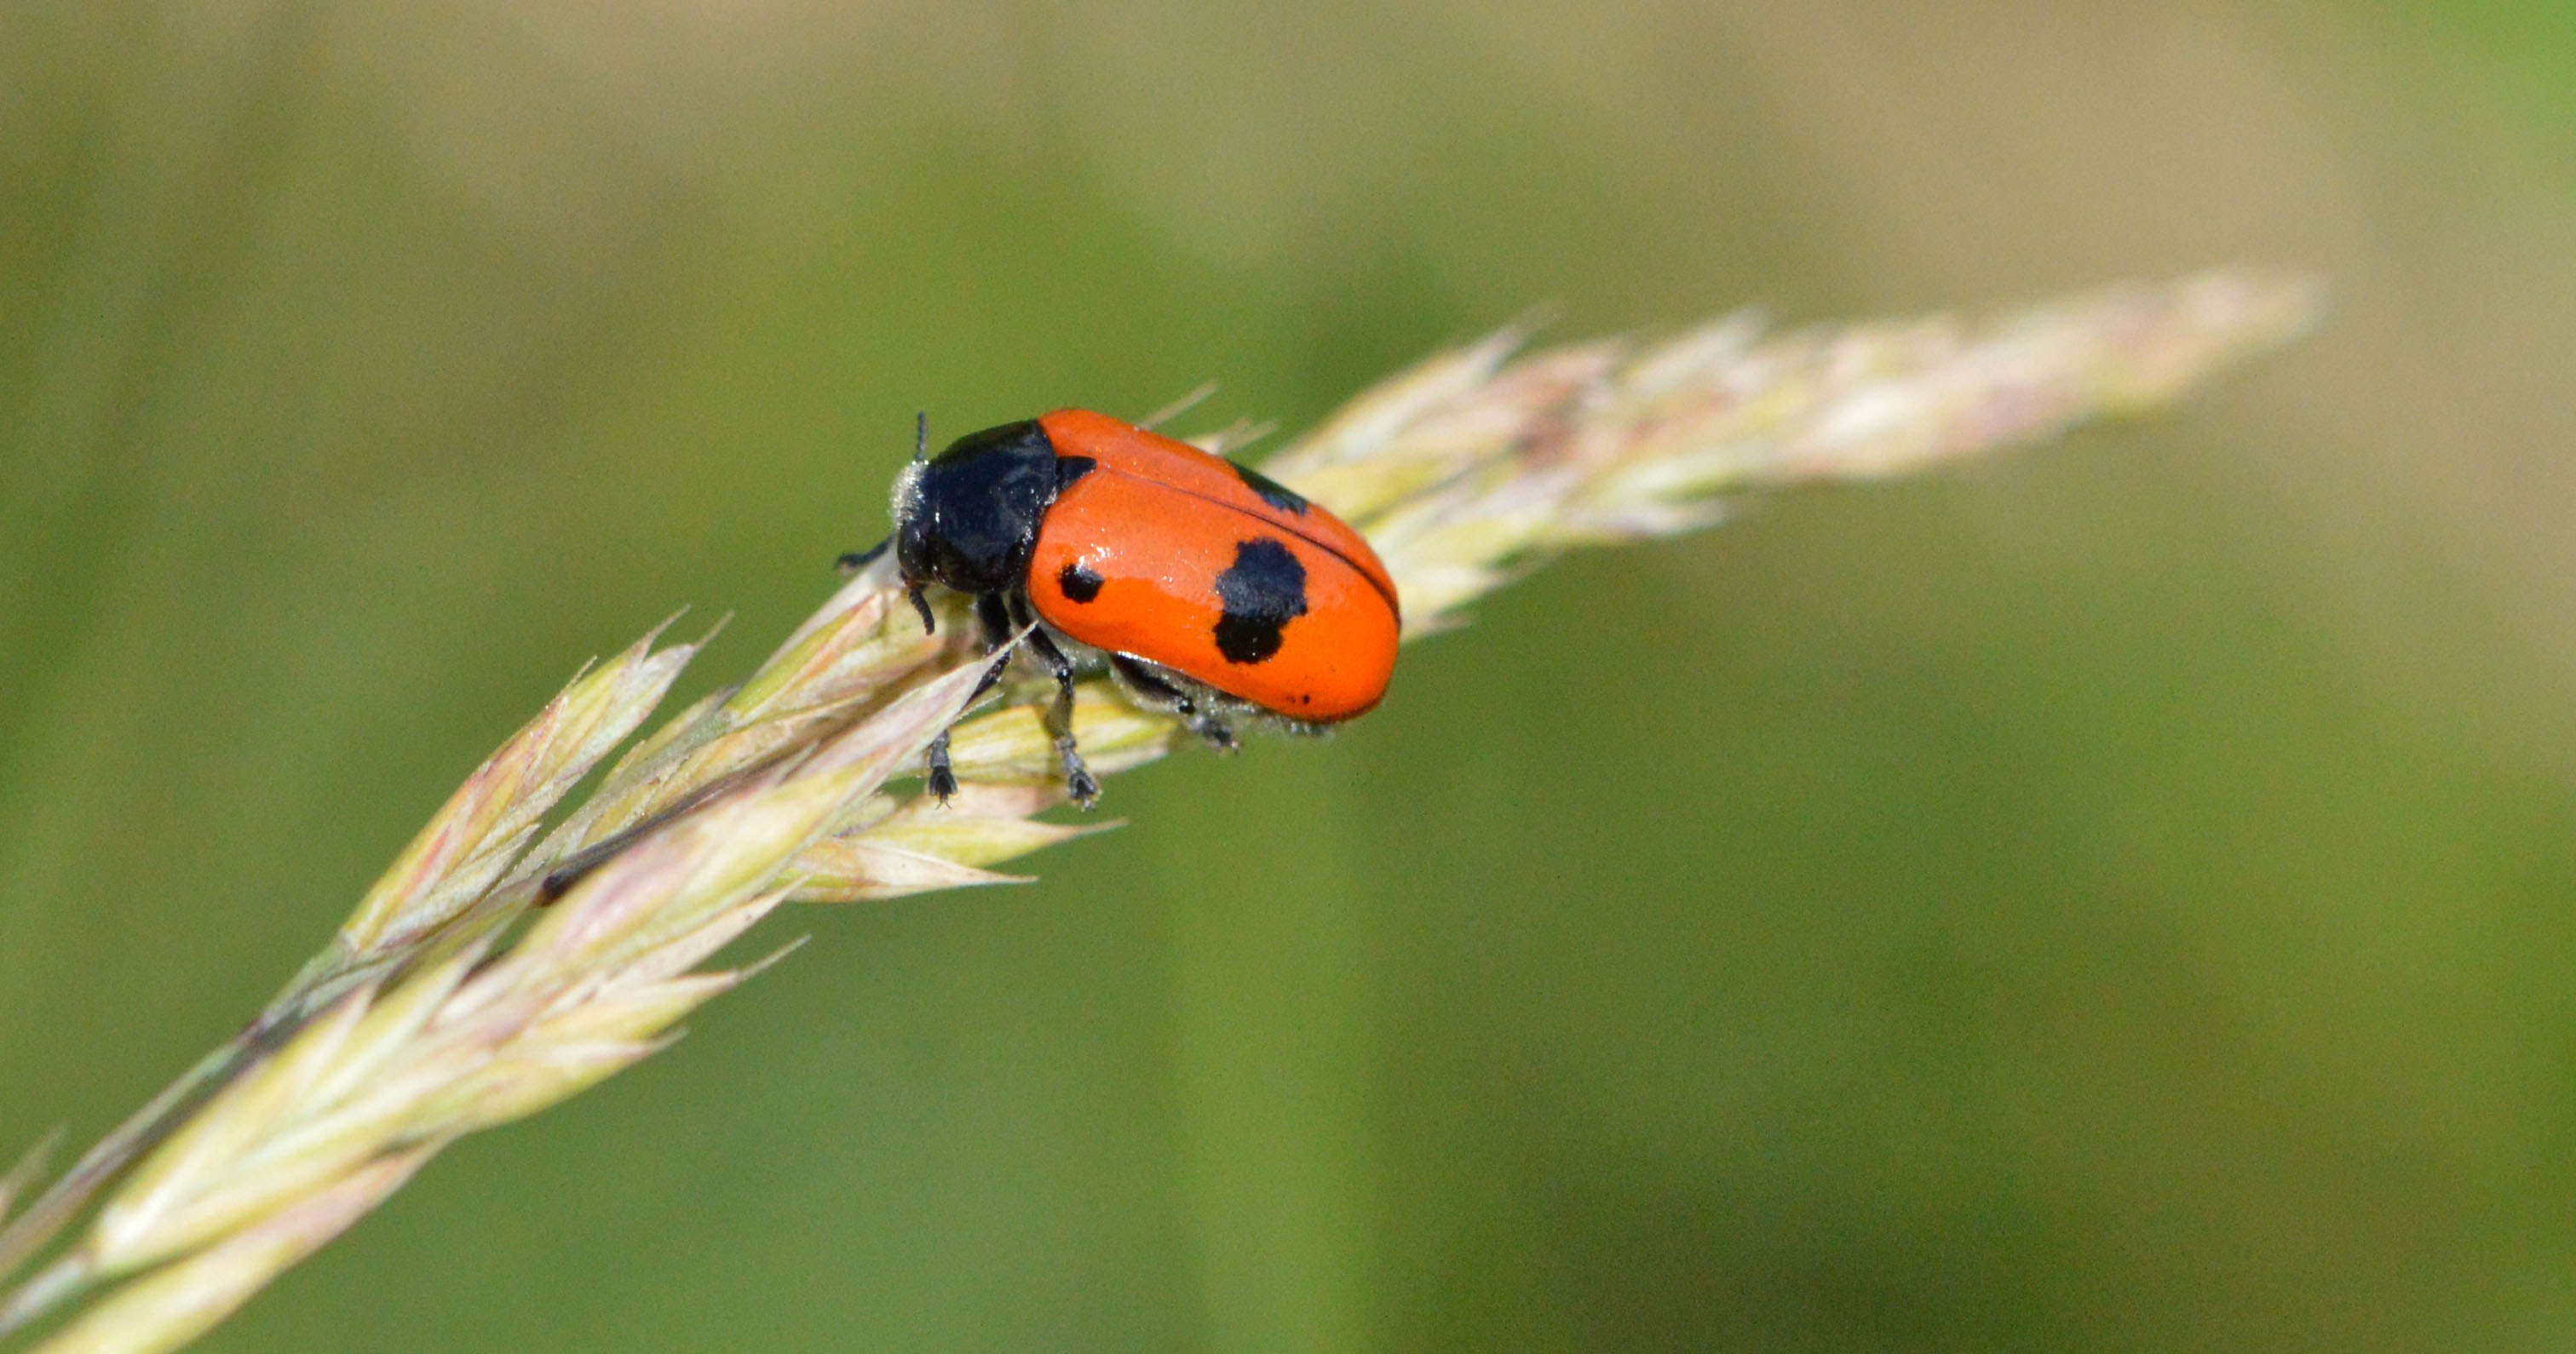 This house is crap - the four spotted leaf beetle